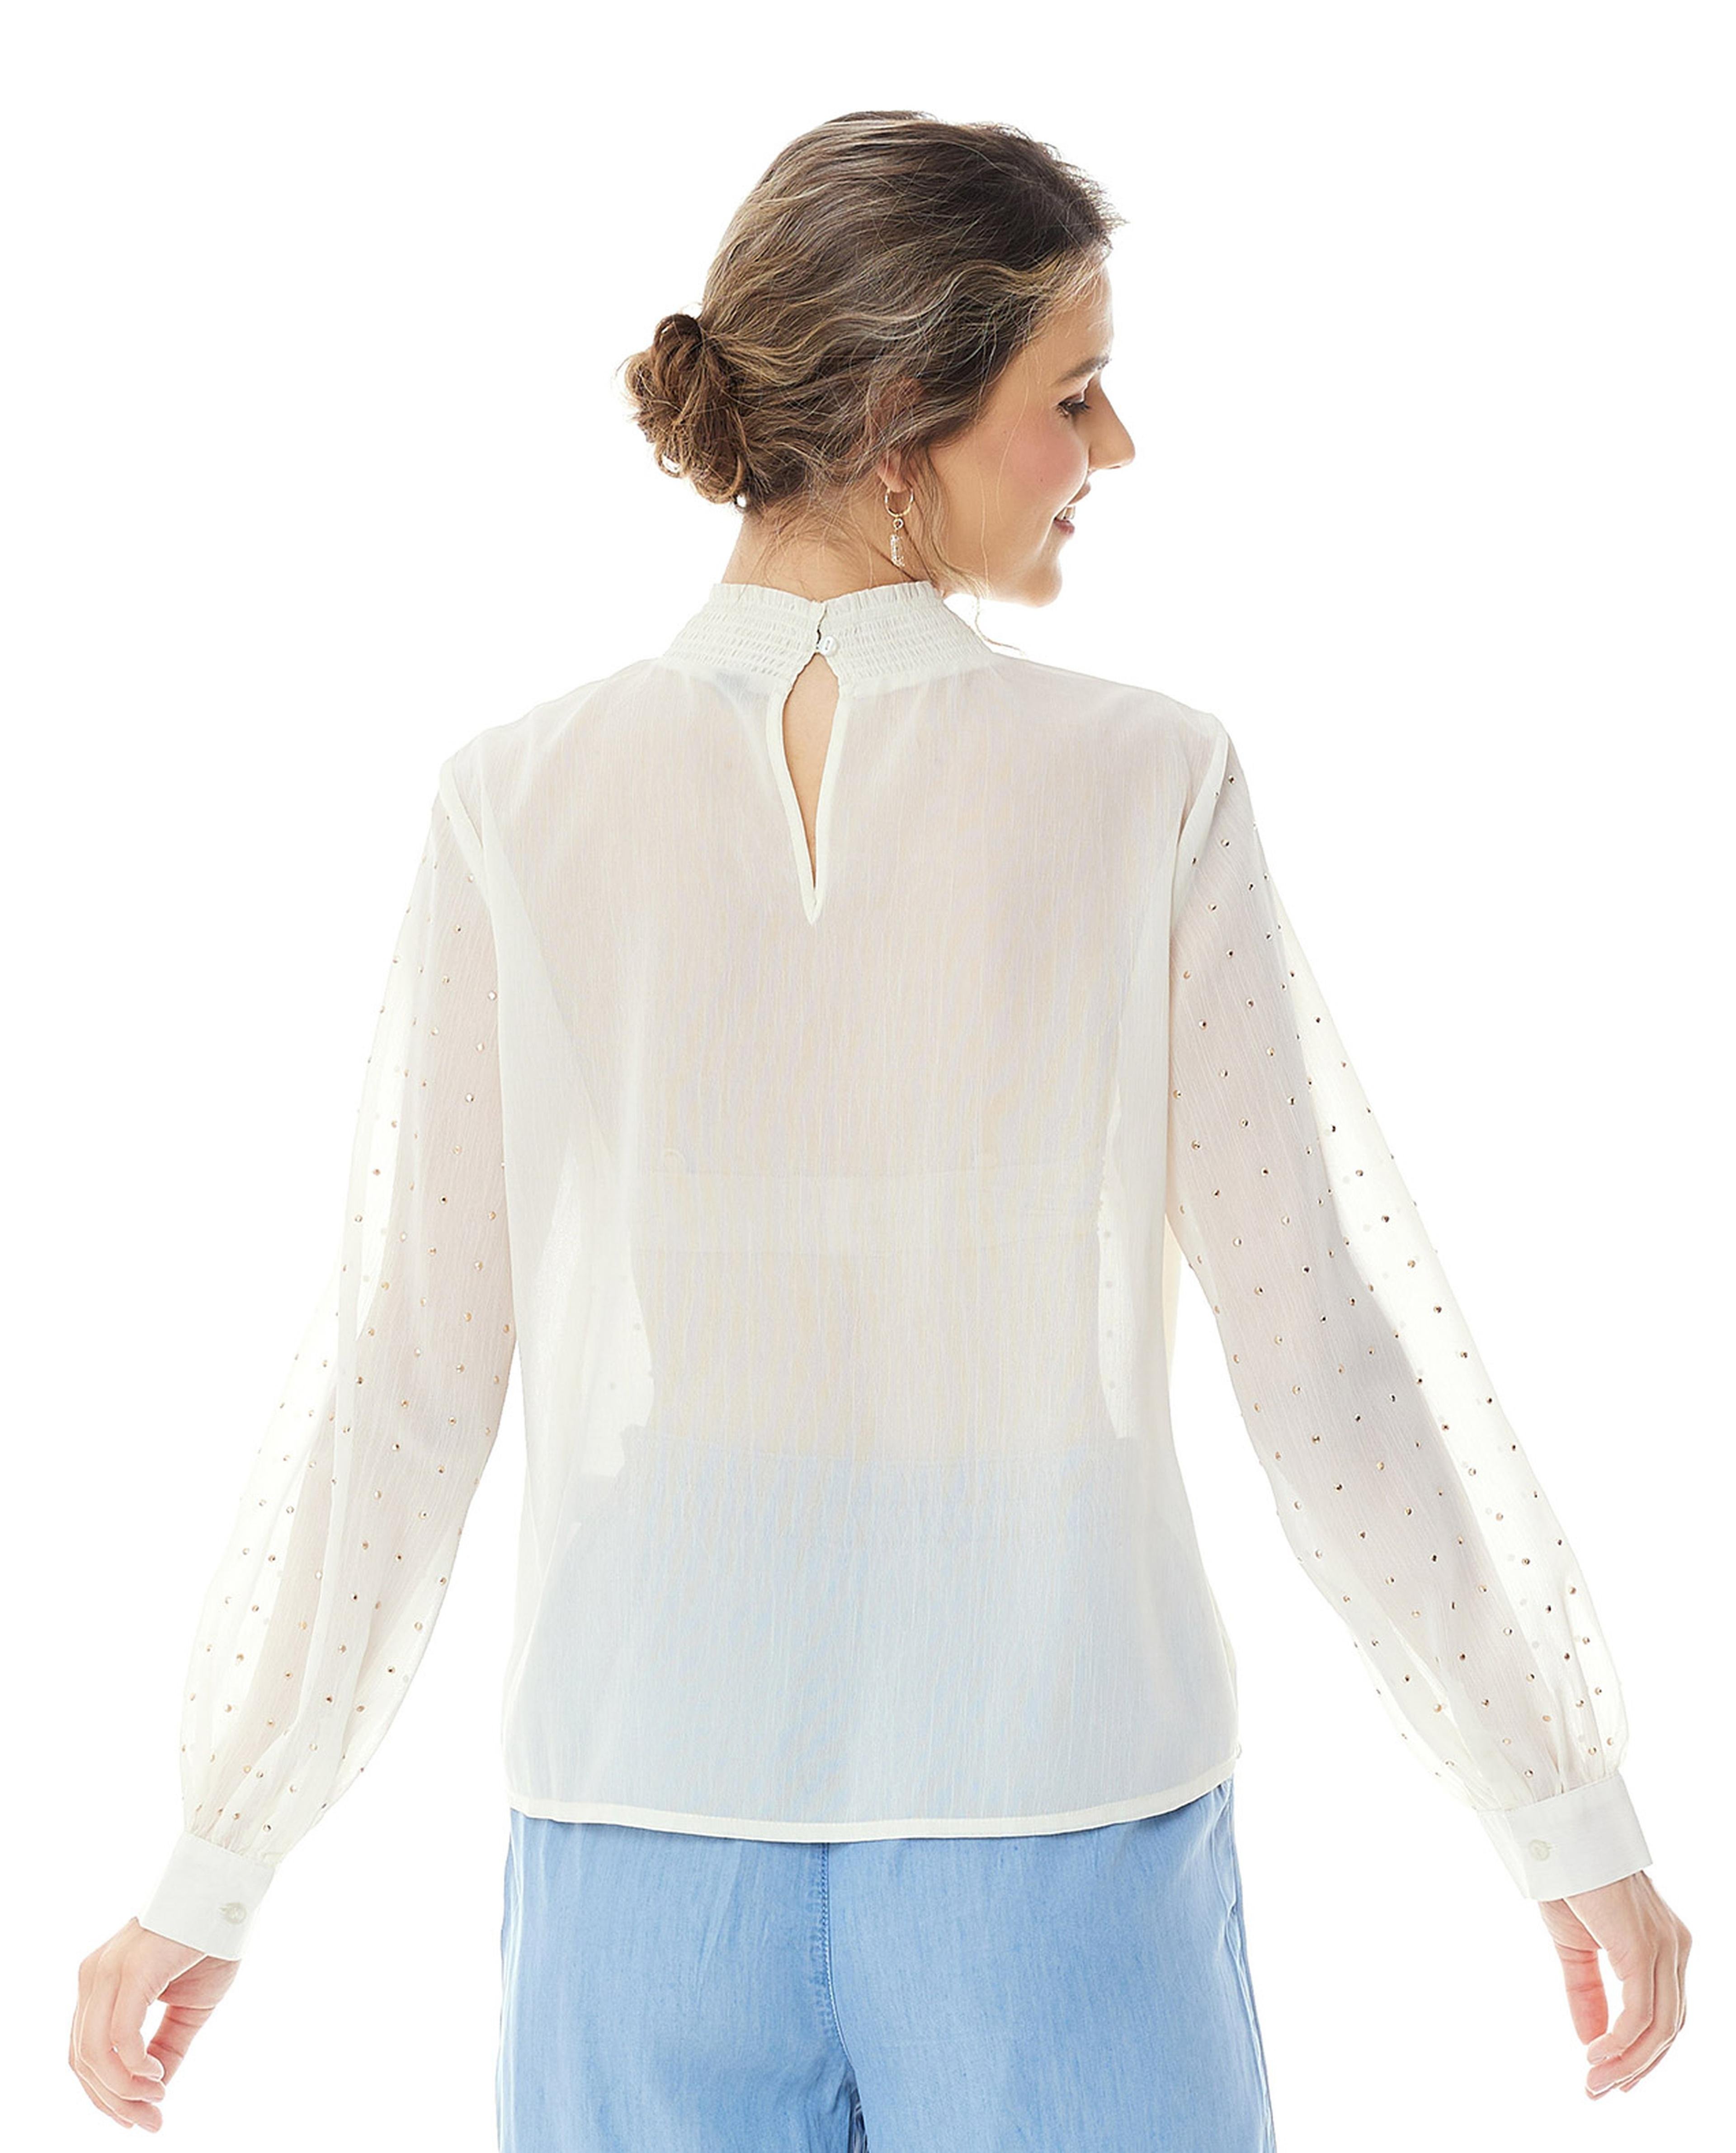 Embellished Top with Mock Neck and Cuffed Sleeves